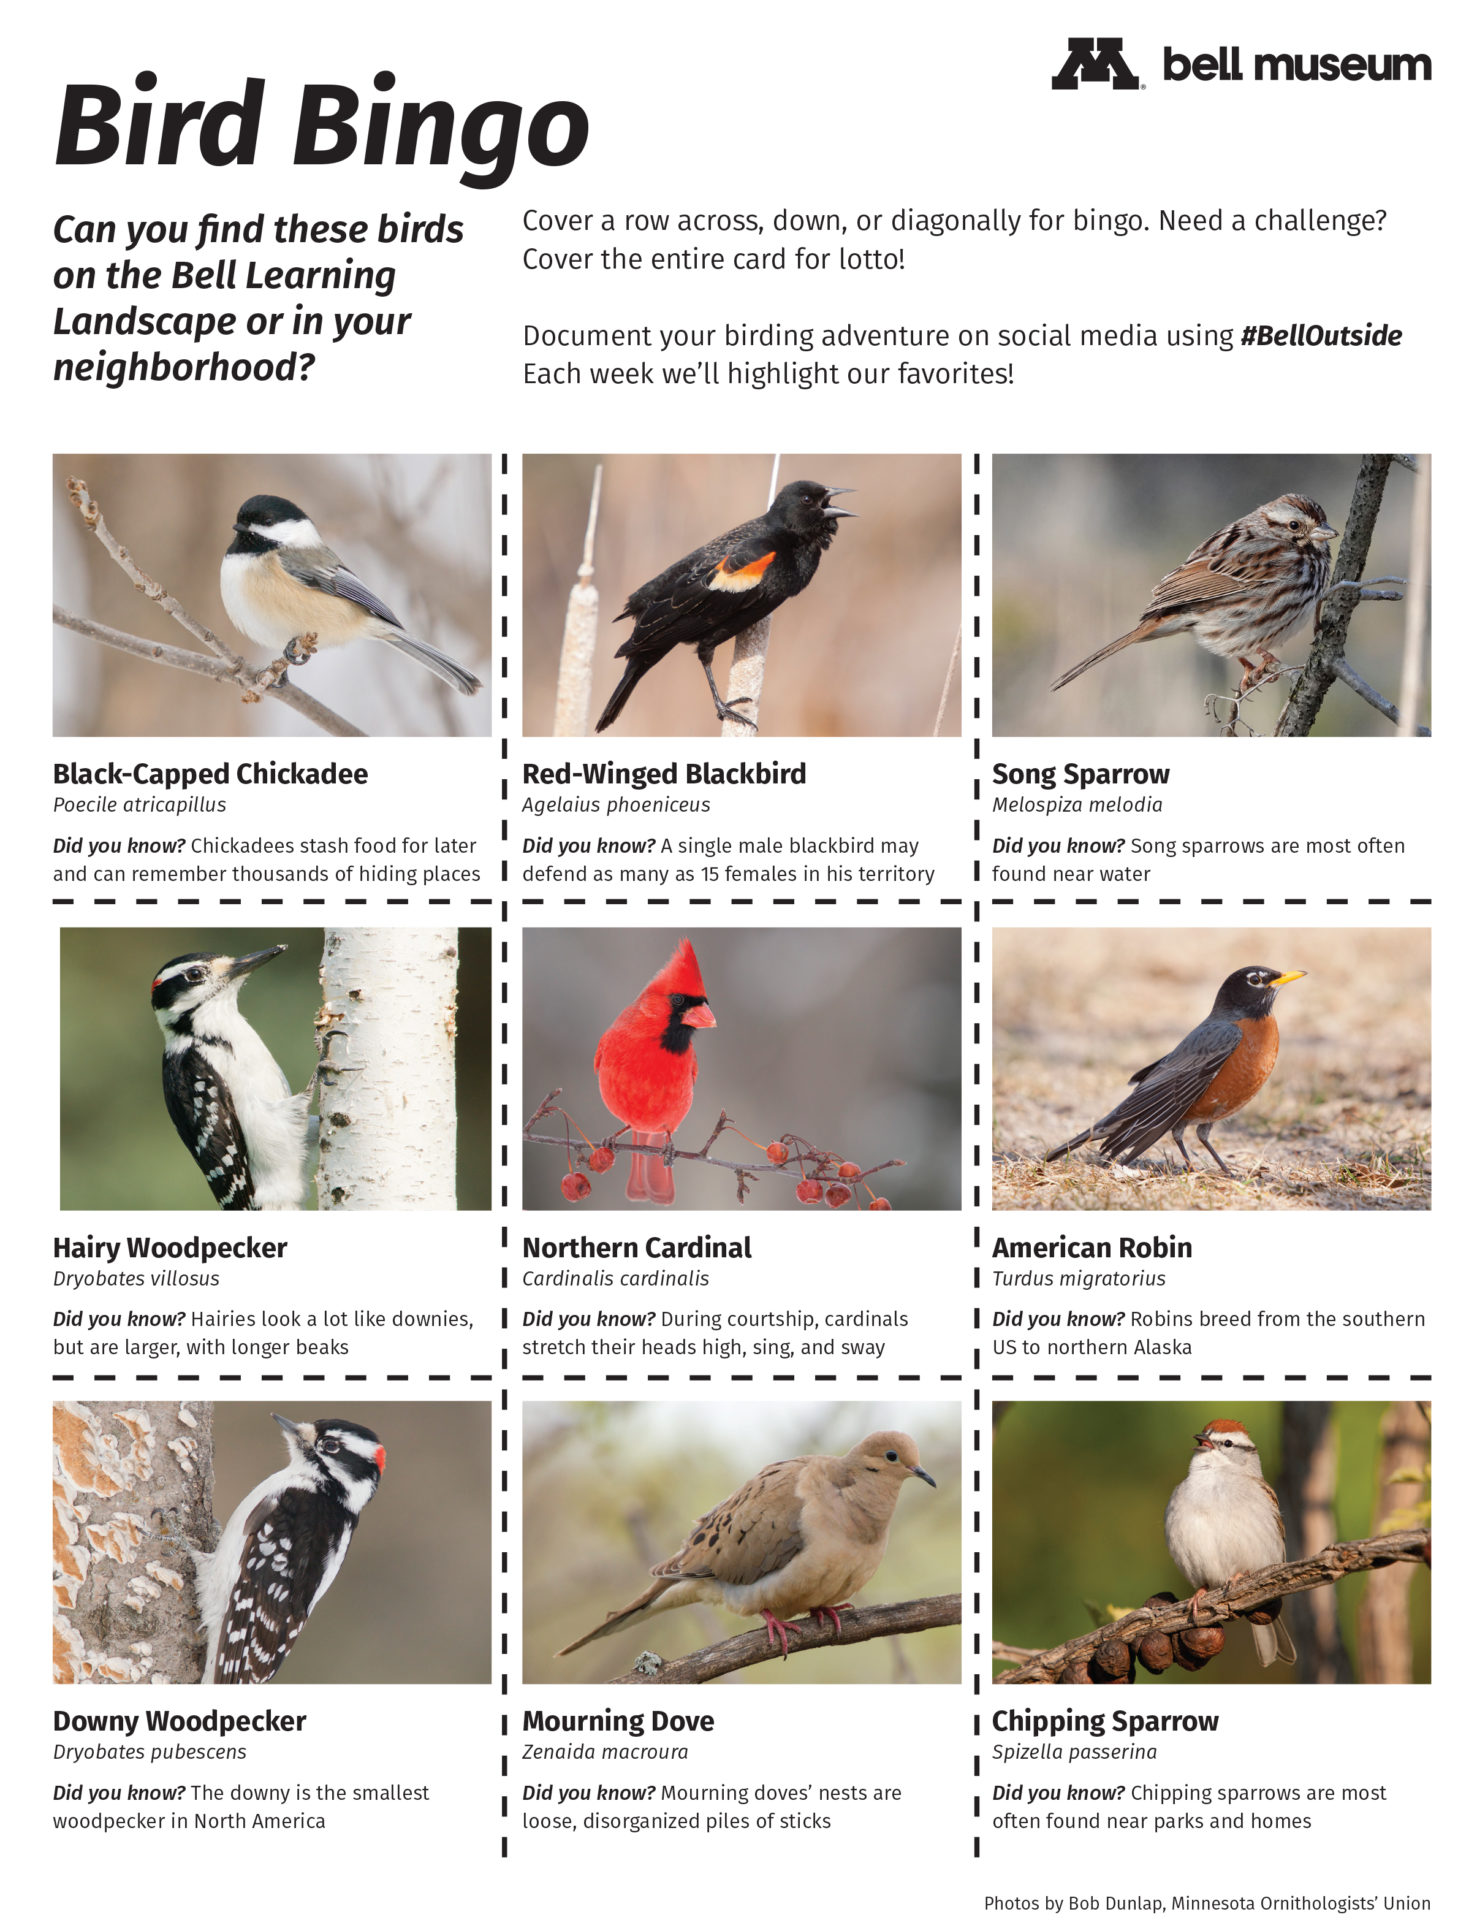 A bingo card with squares for individual birds